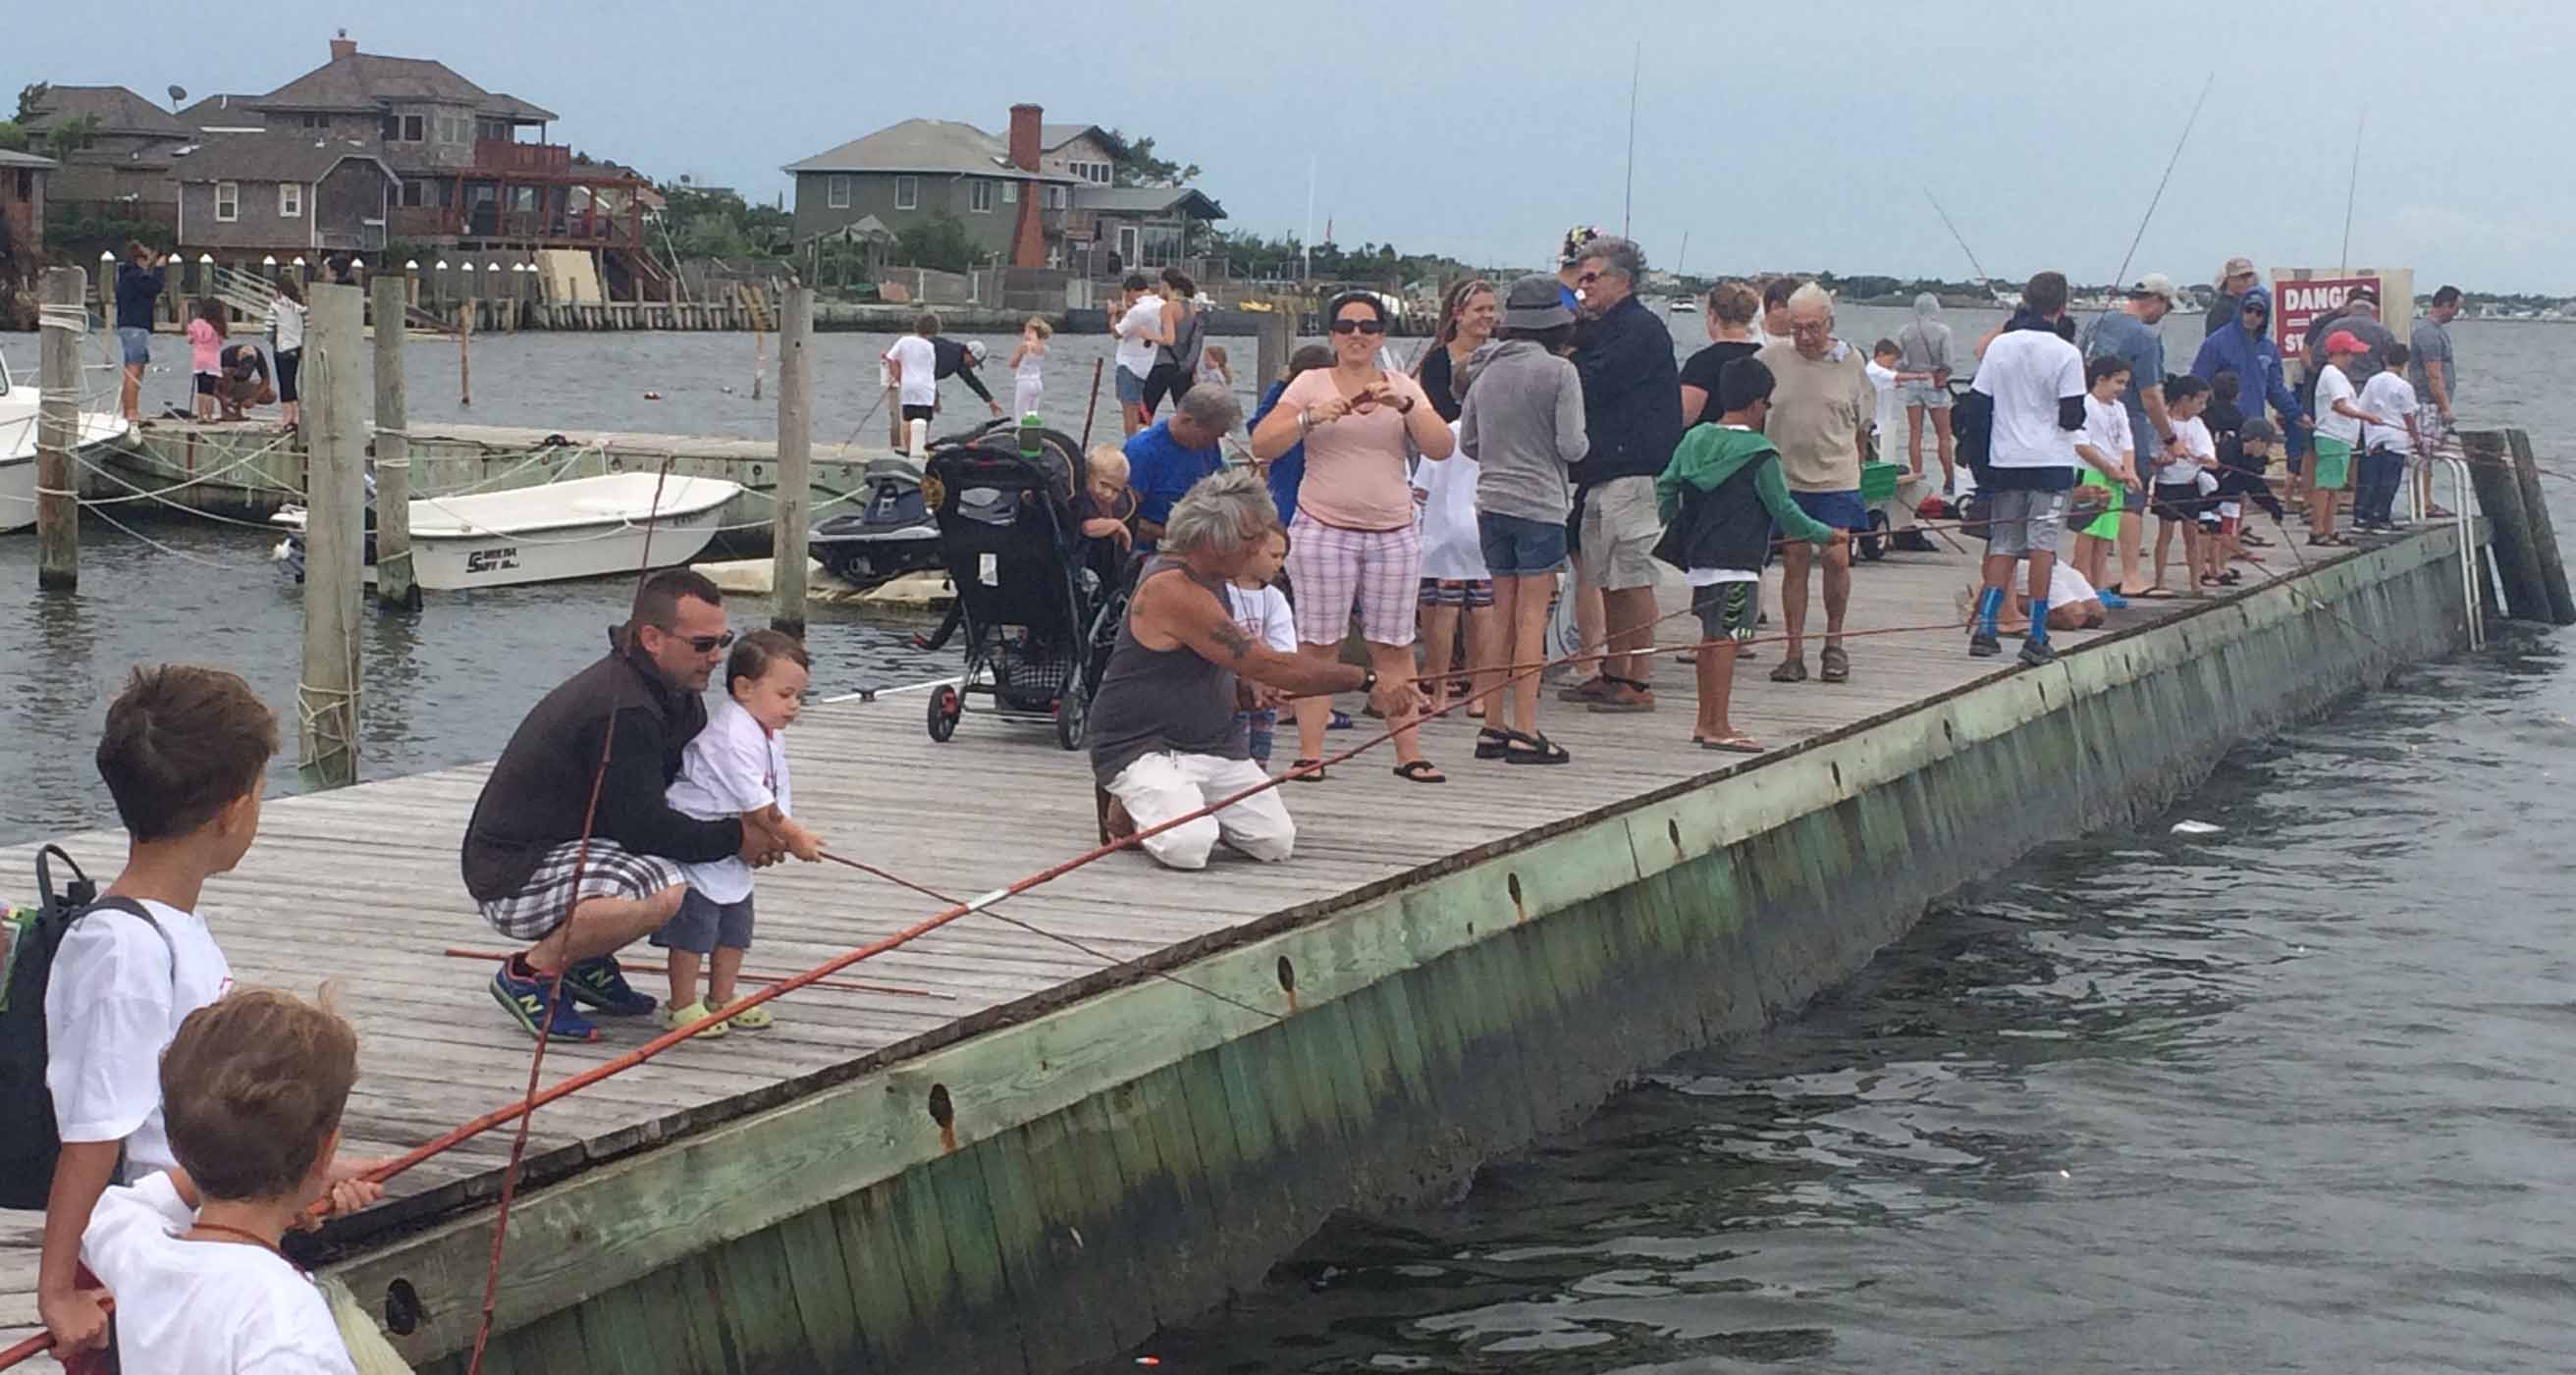 Ocean Beach Fishing Club's annual Catch And Release event for children on the dock